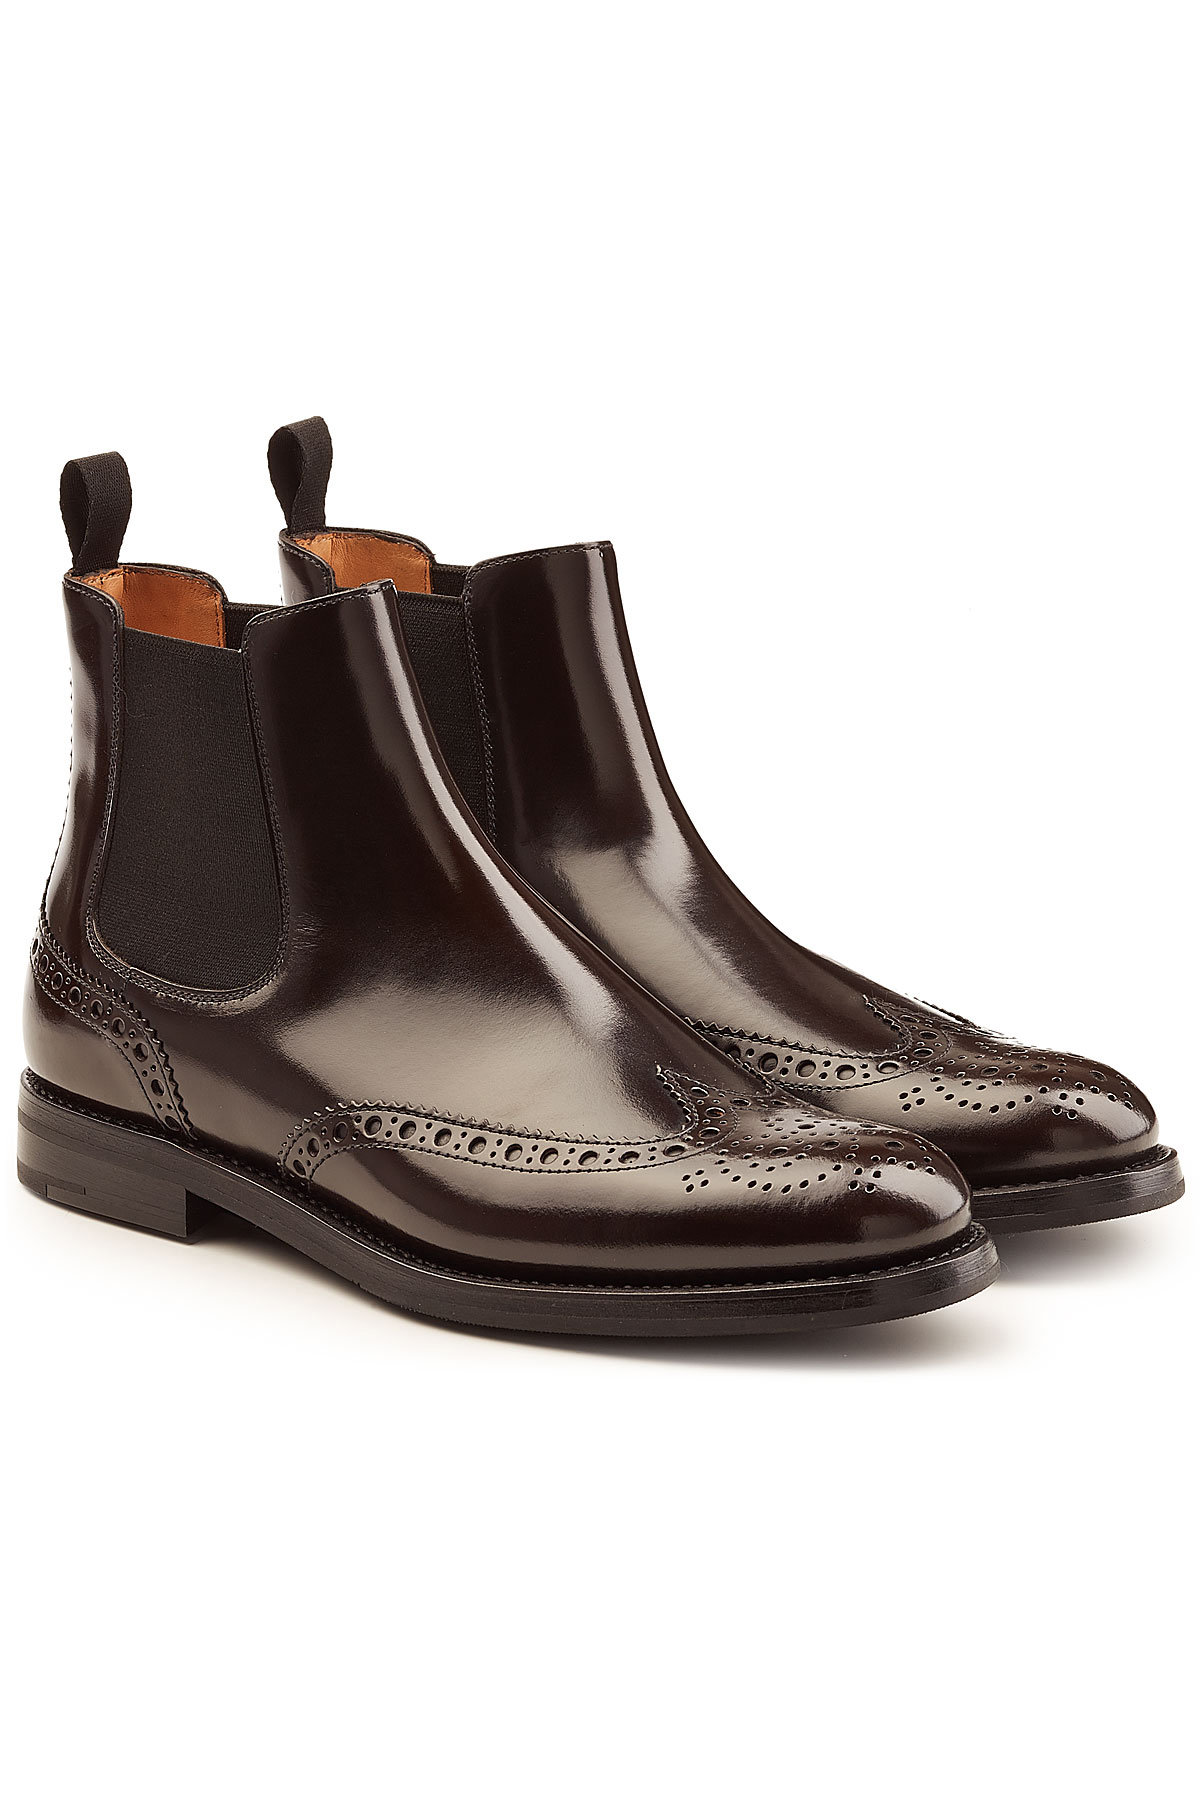 Patent Leather Brogue Ankle Boots by Church's